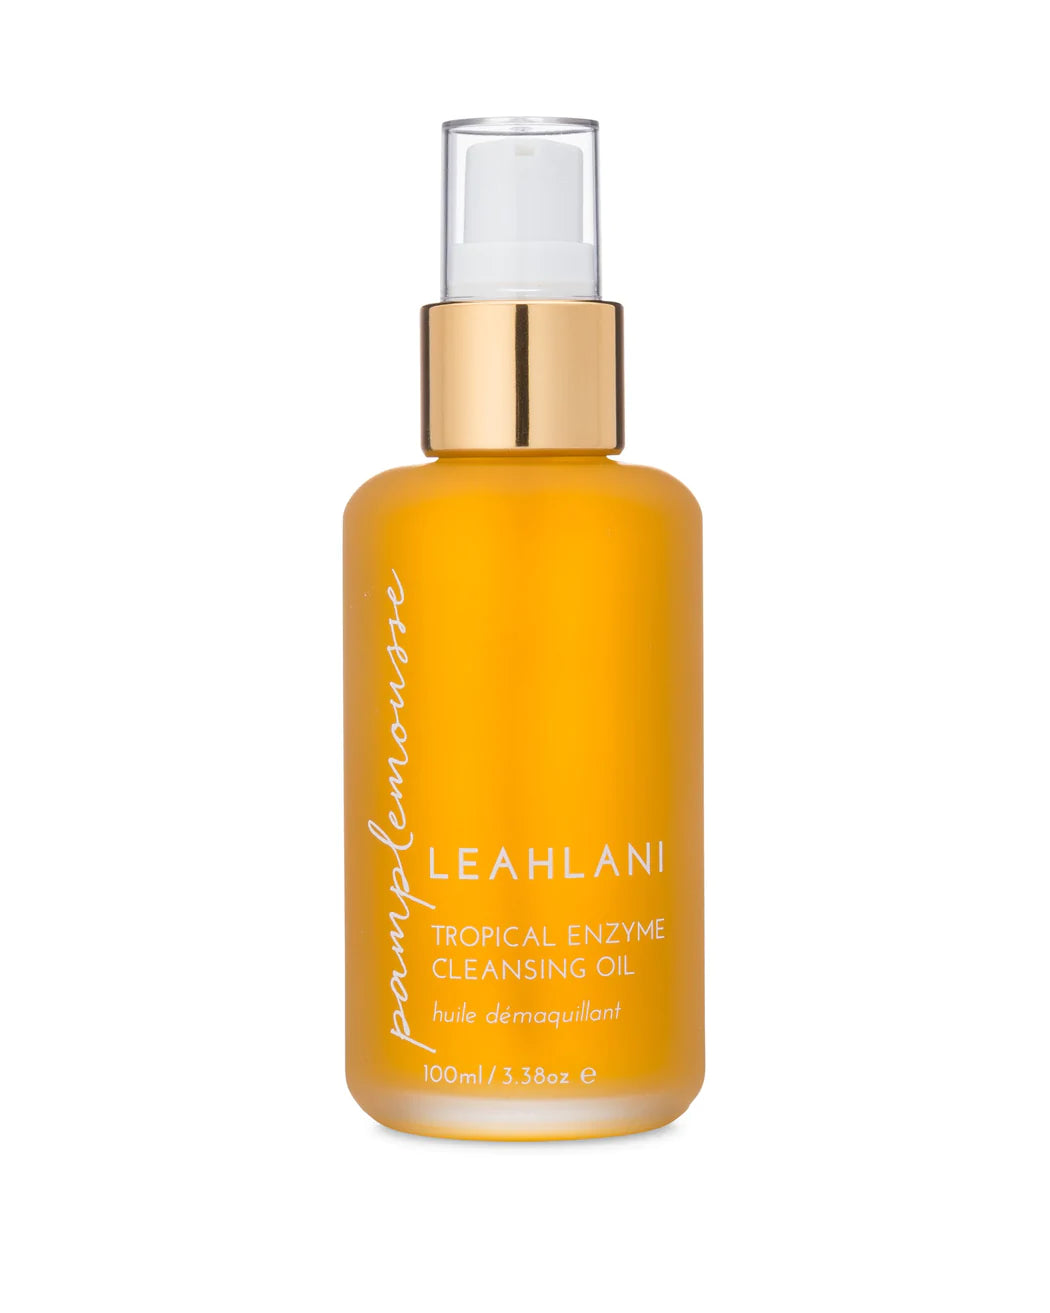 Leahlani Pamplemousse Tropical Enzyme Cleansing Oil